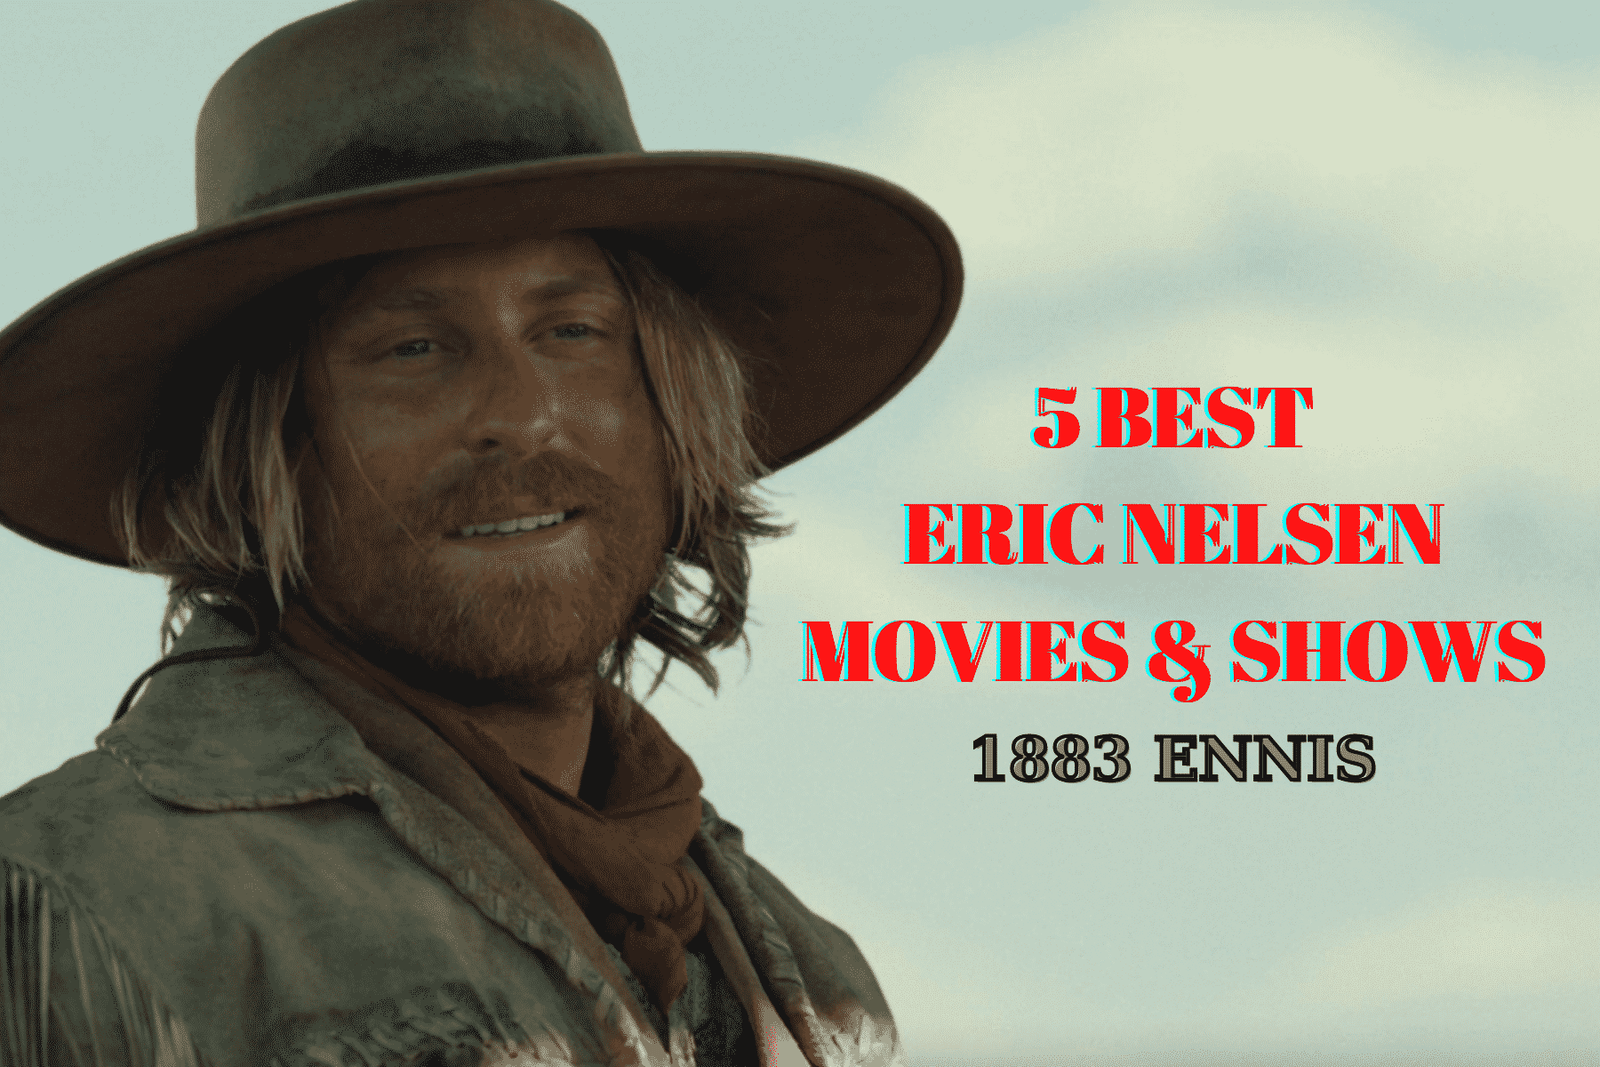 5 Best Eric Nelsen Movies and Shows Ranked - 1883 Ennis